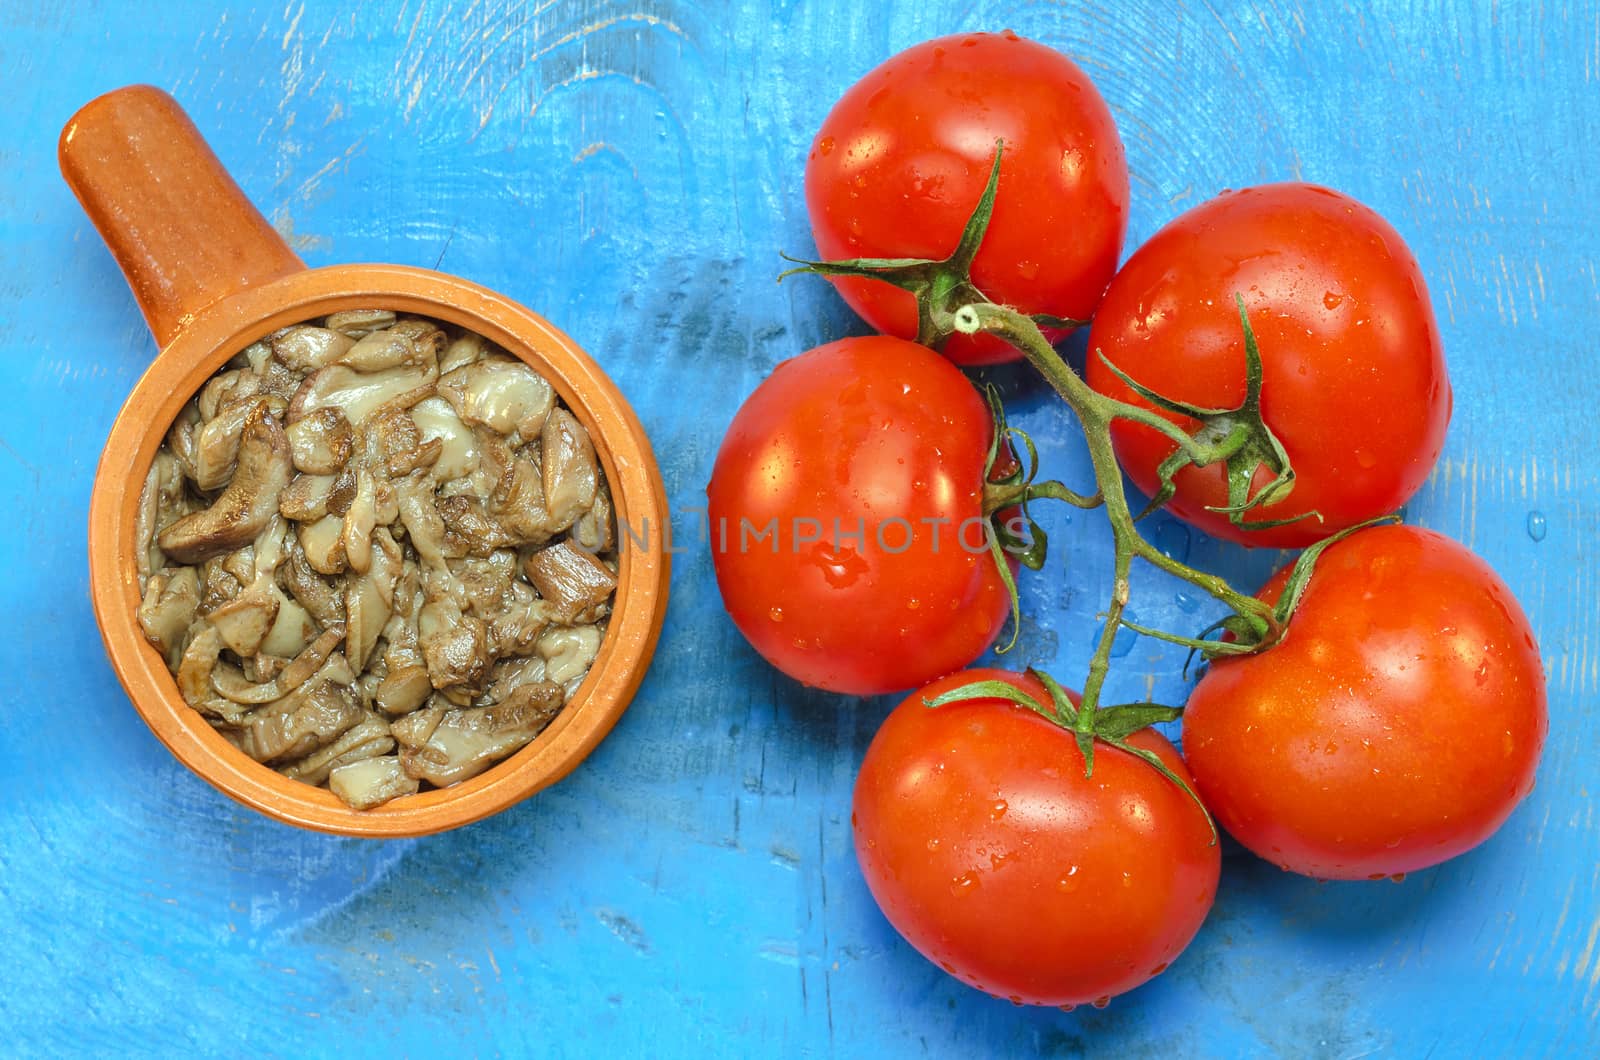 Fried mushrooms in ceramic dishes and a branch with fresh tomatoes on blue wooden surface